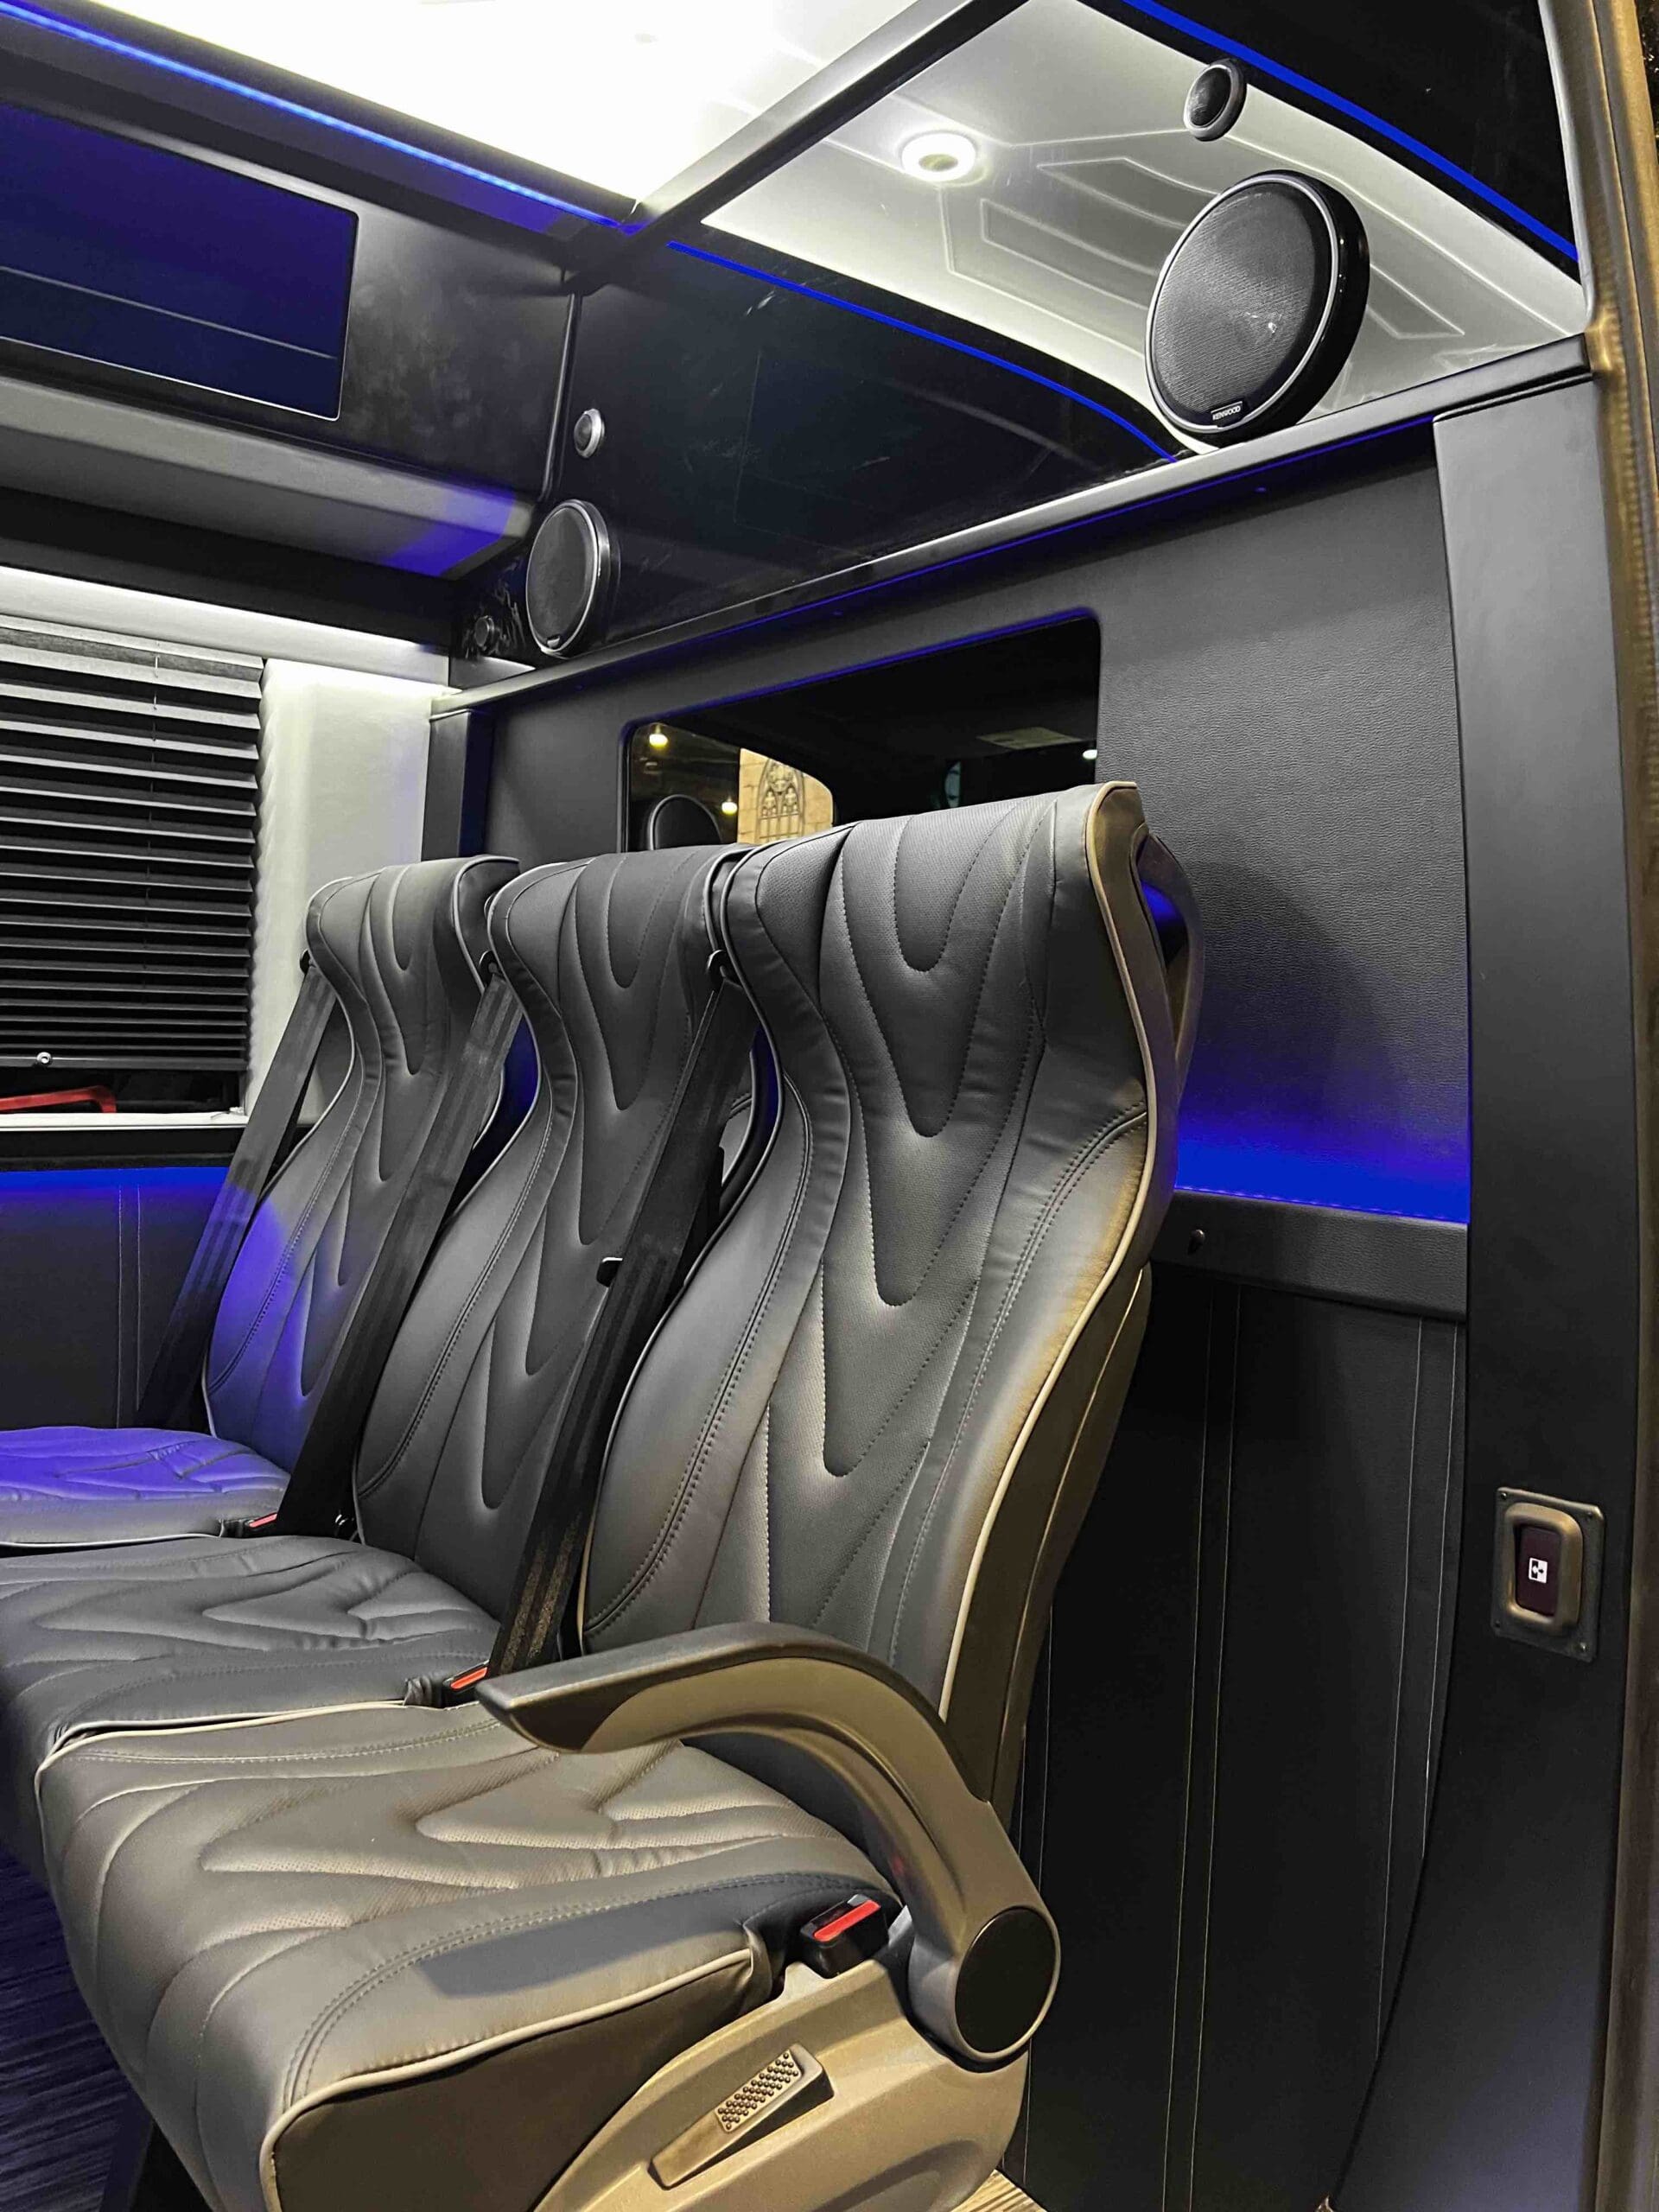 Golden Limo Executive Sprinter Shuttle, interior view showing front row of luxury seating in passenger area of vehicle